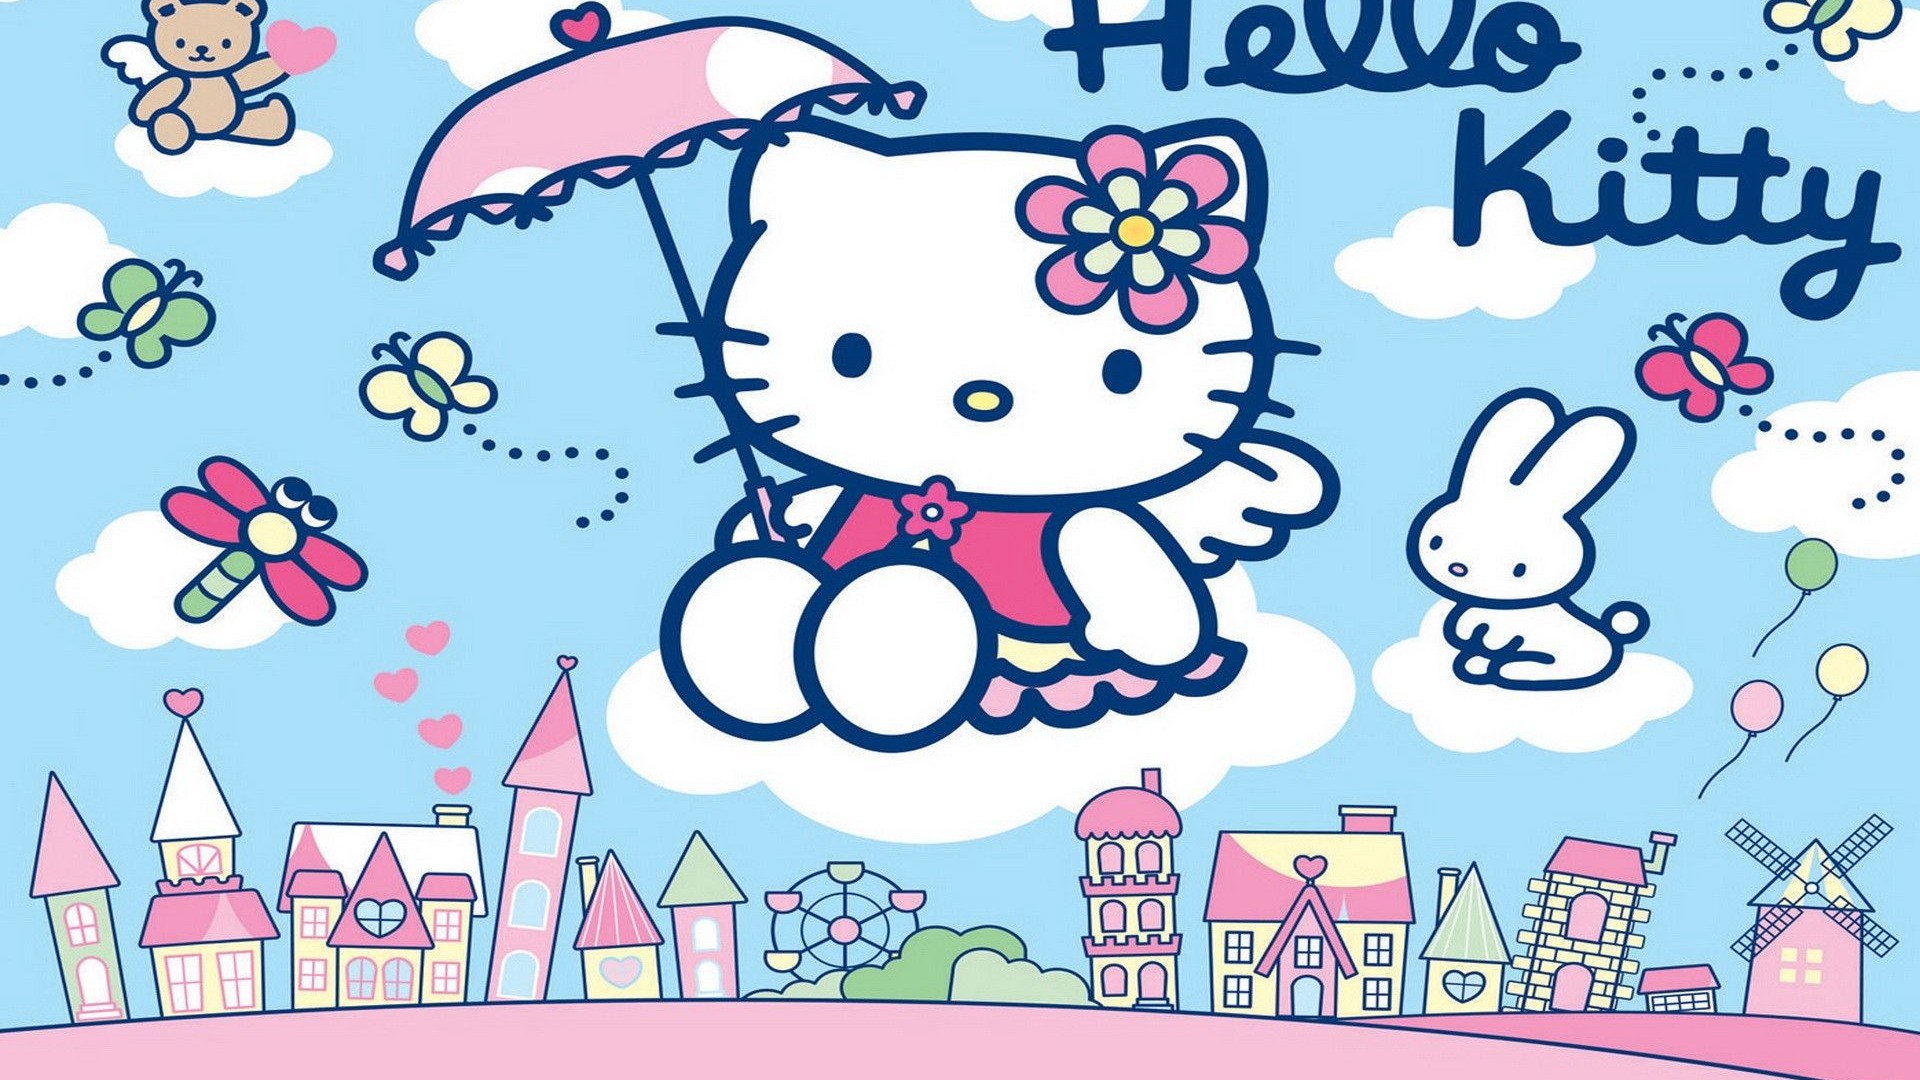 Desktop Wallpaper Sanrio Hello Kitty with resolution 1920X1080 pixel. You can use this wallpaper as background for your desktop Computer Screensavers, Android or iPhone smartphones